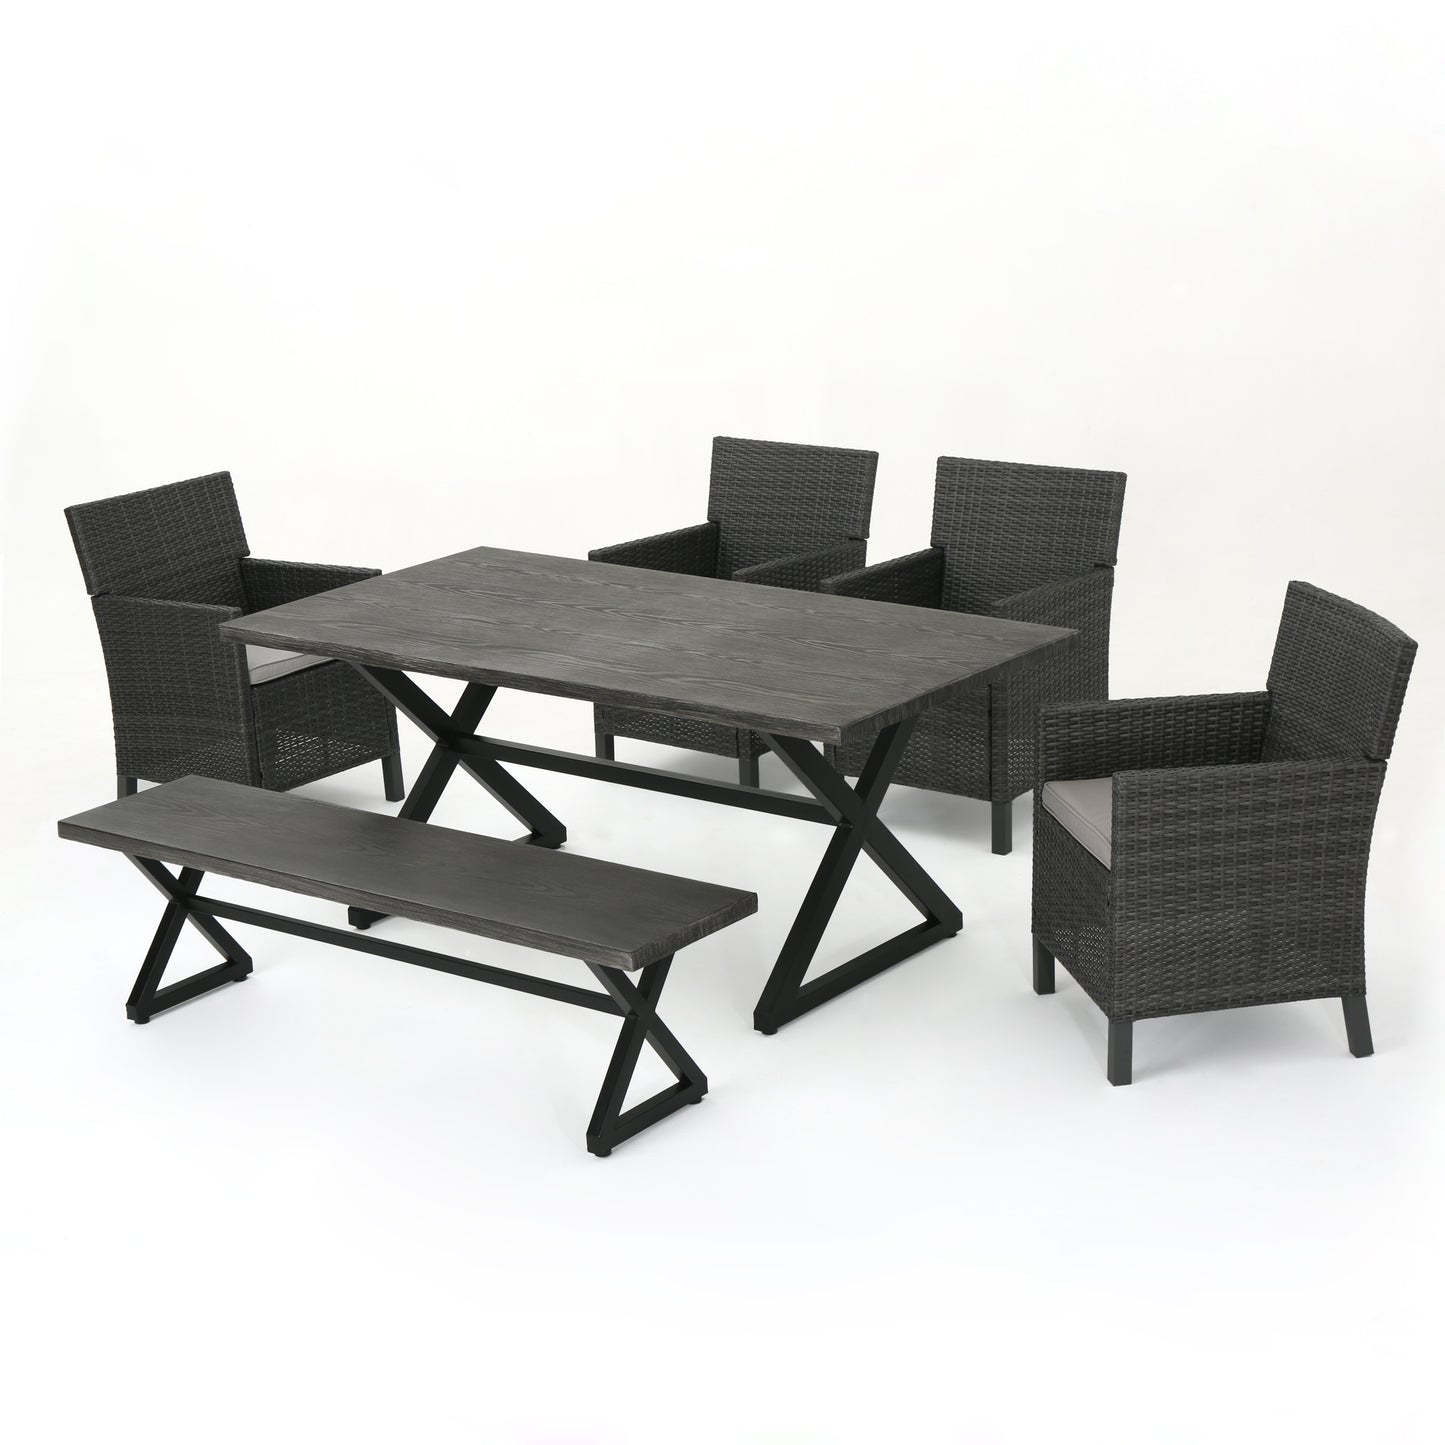 Ainna Outdoor 6 Piece Wicker Dining Set with Aluminum Dining Table